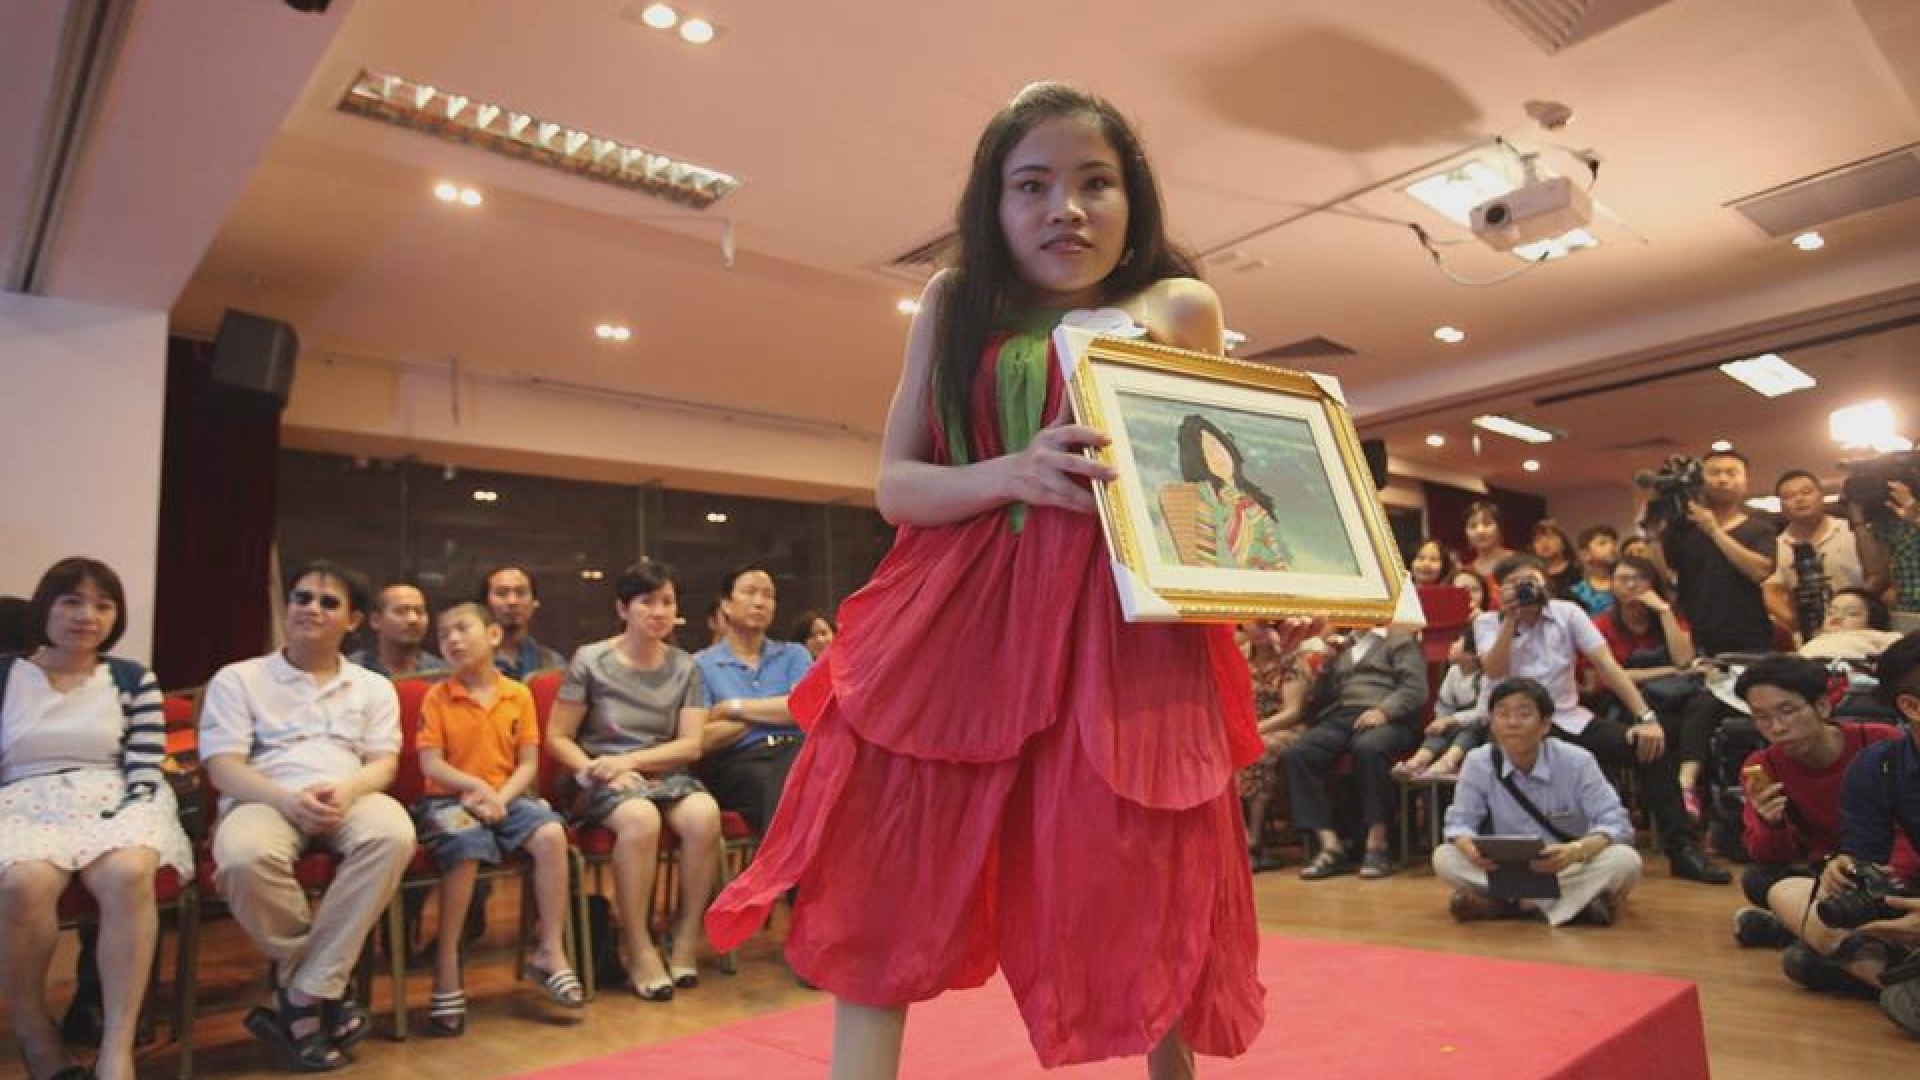 Thuong Thuong Handmade hosted a fashion show in Hanoi, featuring her staff as models. Hoang Phuong Thao wears a paper dress and a quilling artwork she has made  (Photo: Courtesy of Thuong)